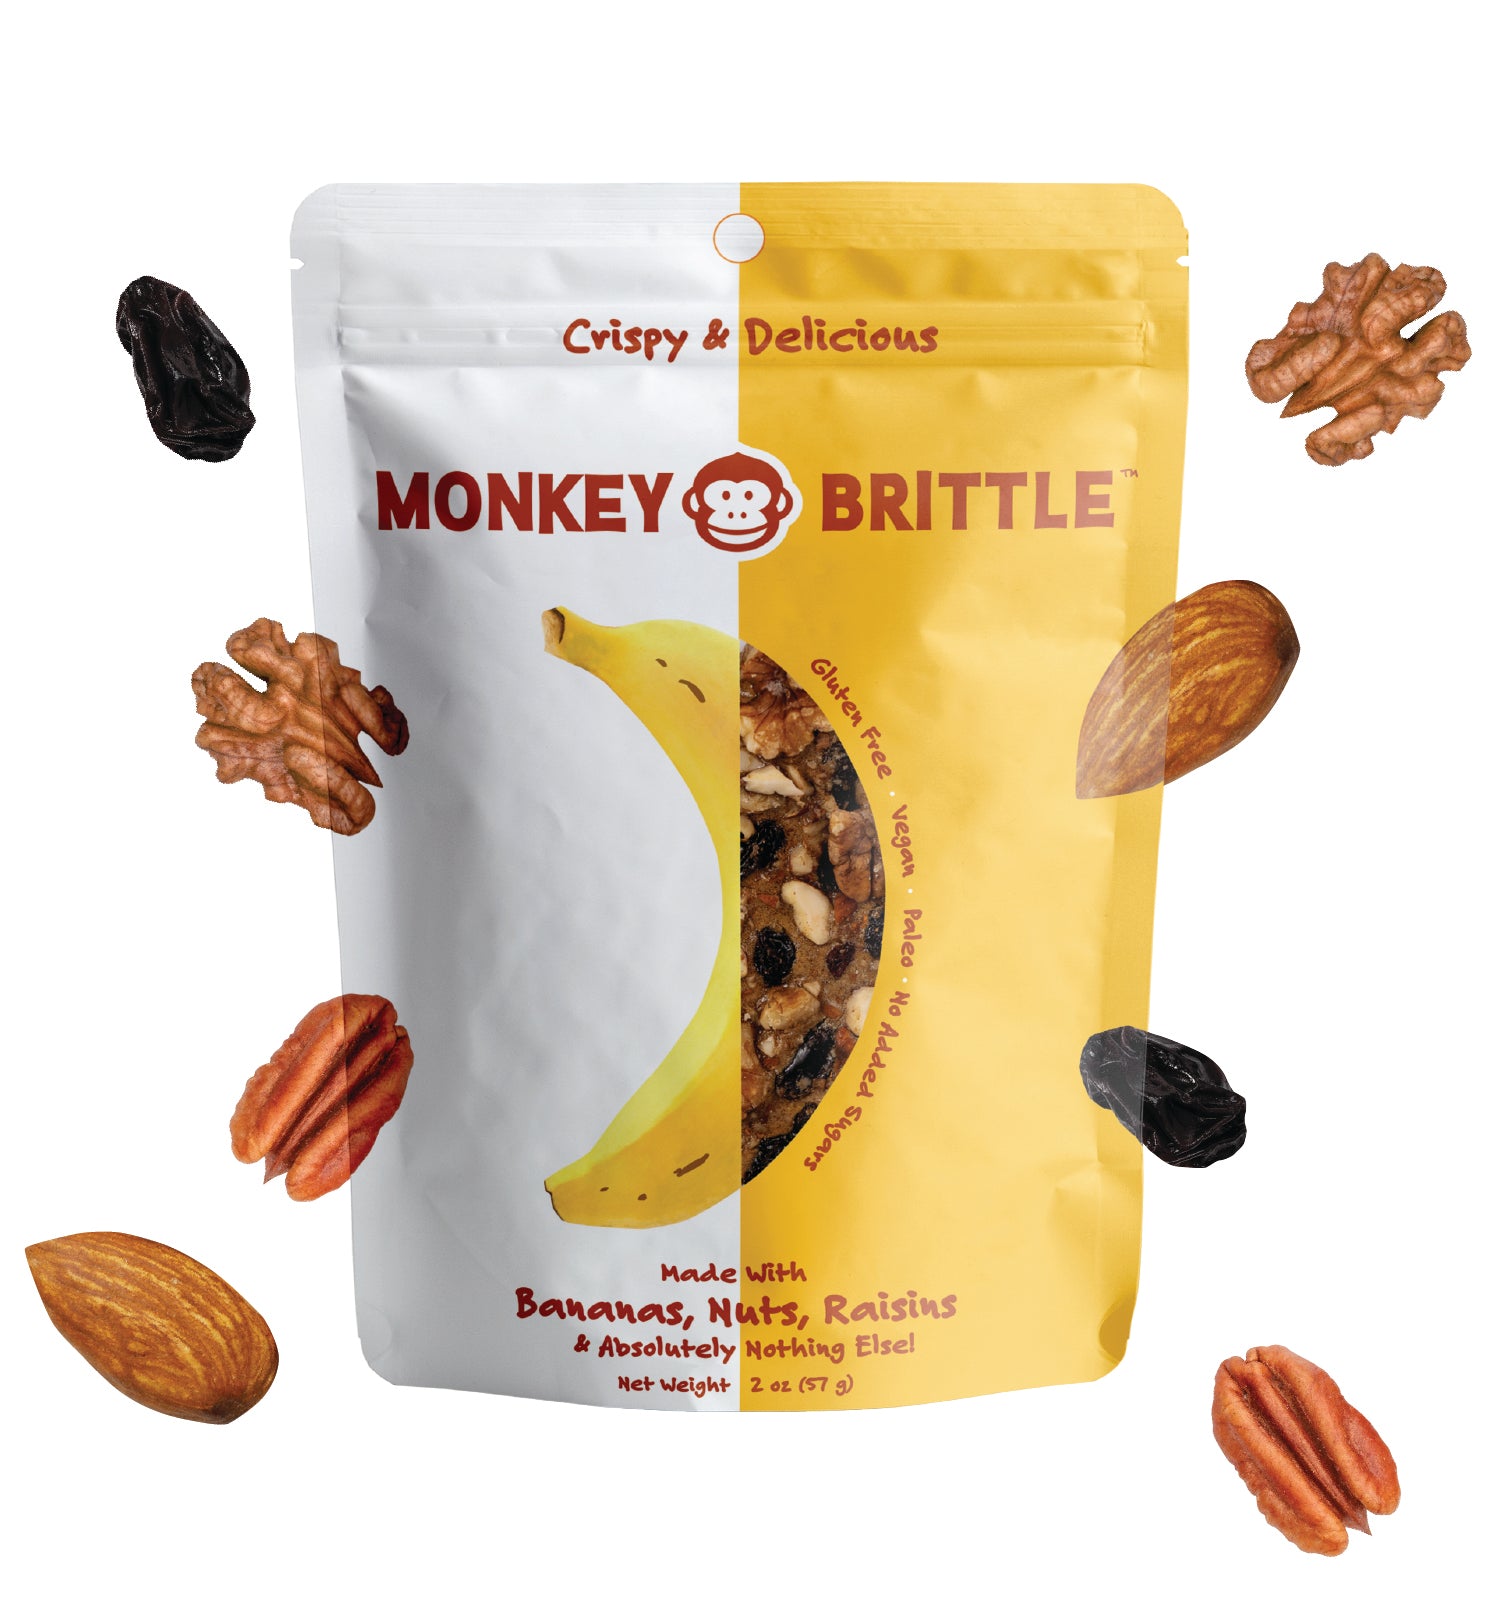 A bag of monkey brittle on a white background, with floating nuts and raisins surrounding it. The bag design is half yellow and half white, and features bananas, nuts and raisins. The words crispy and delicious are written at the top of the bag